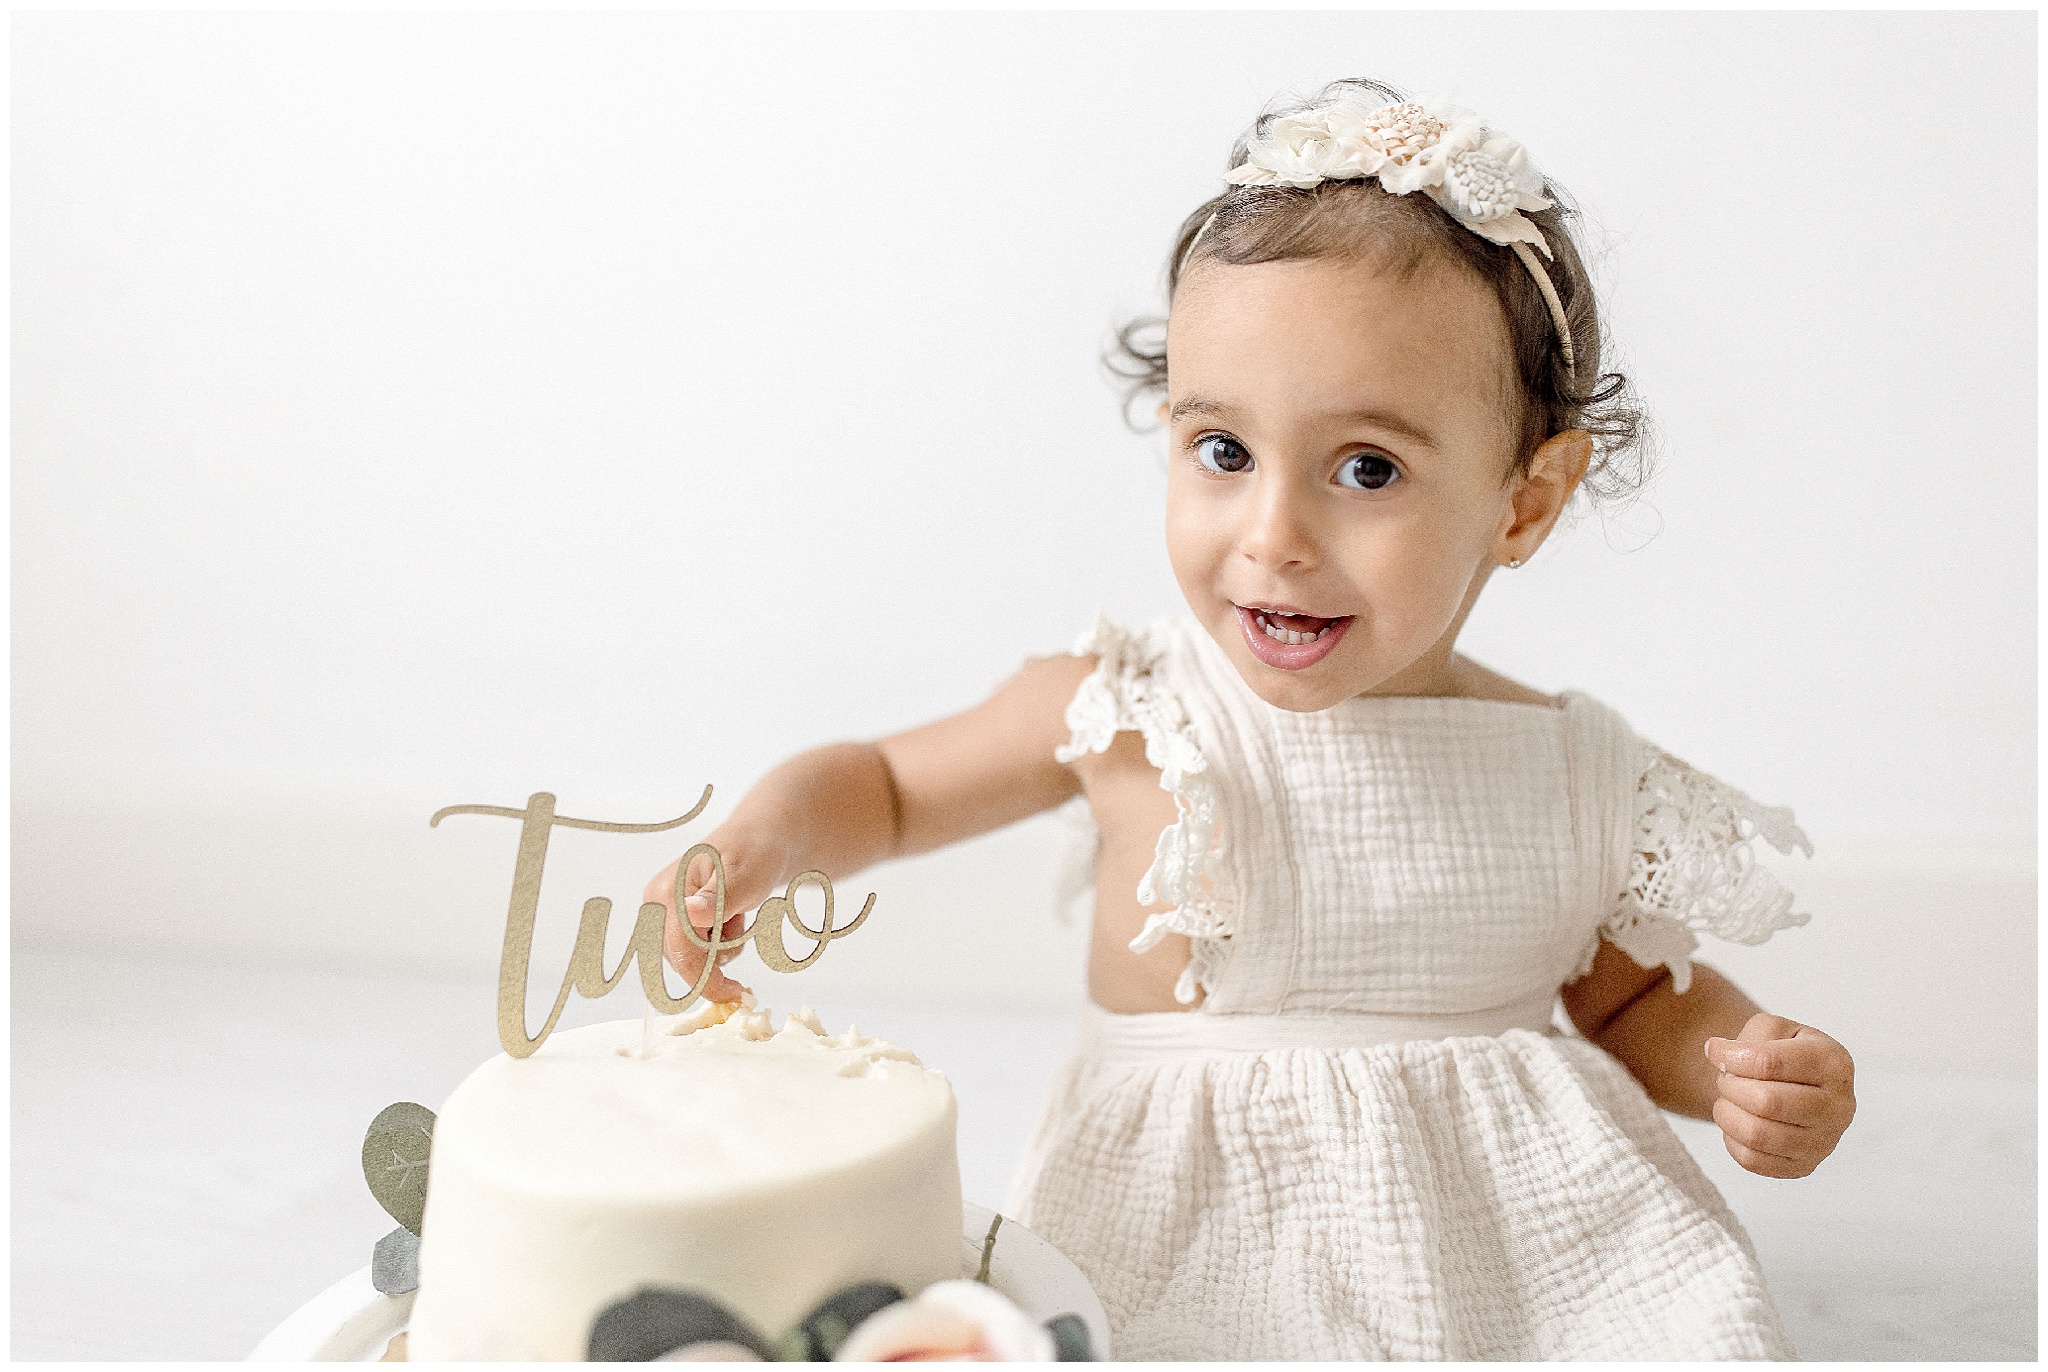 Child dips their fingers into white smash cake. Photo by Ivanna Vidal Photography.